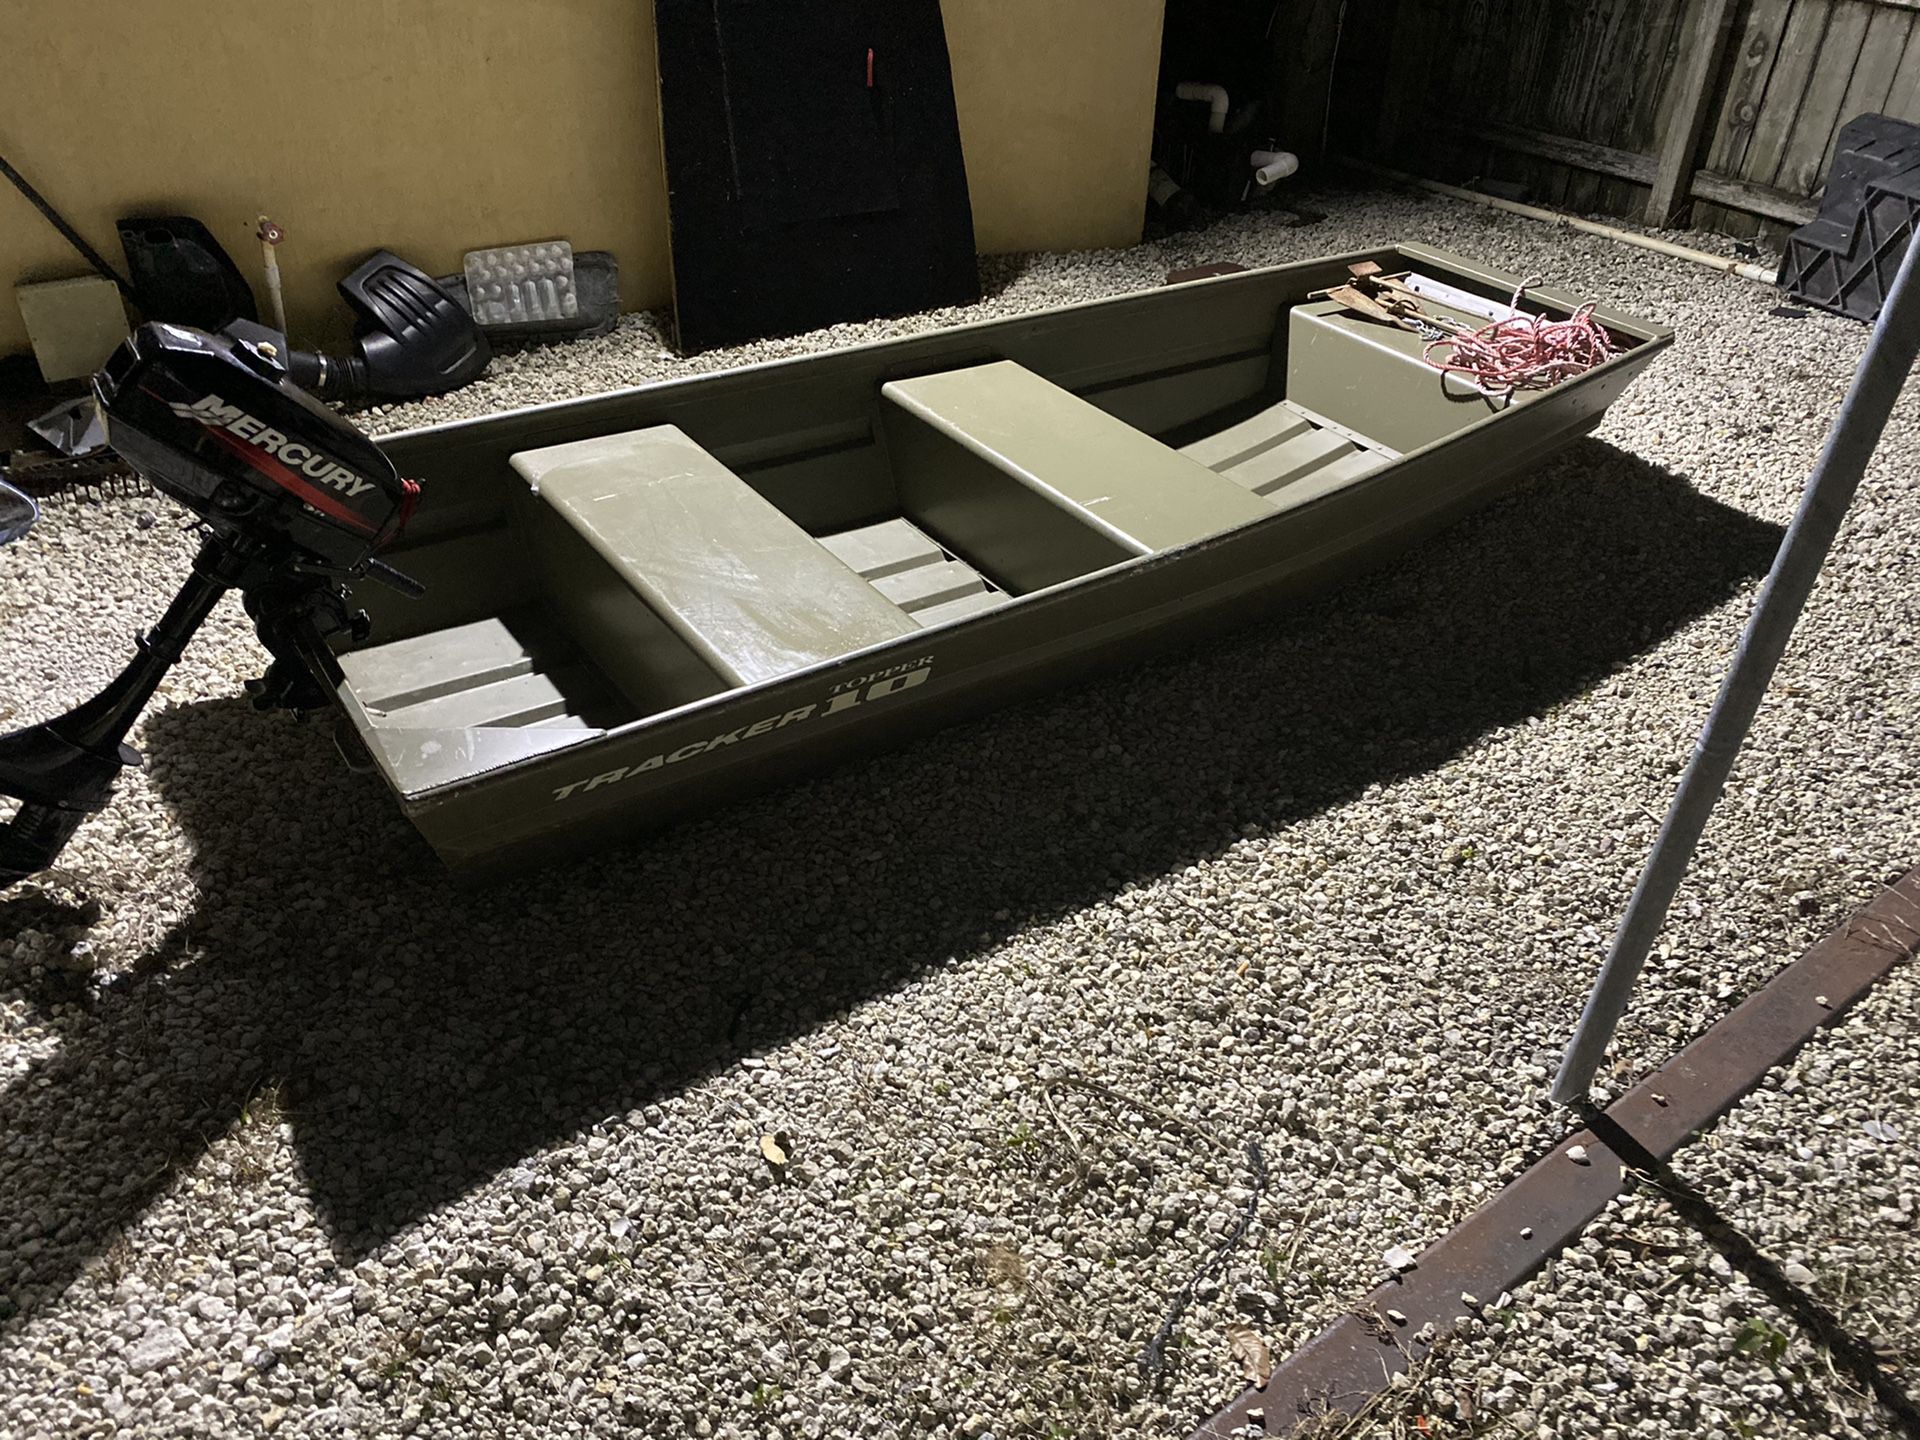 10’ tracker flat bass boat and gas outboard motor